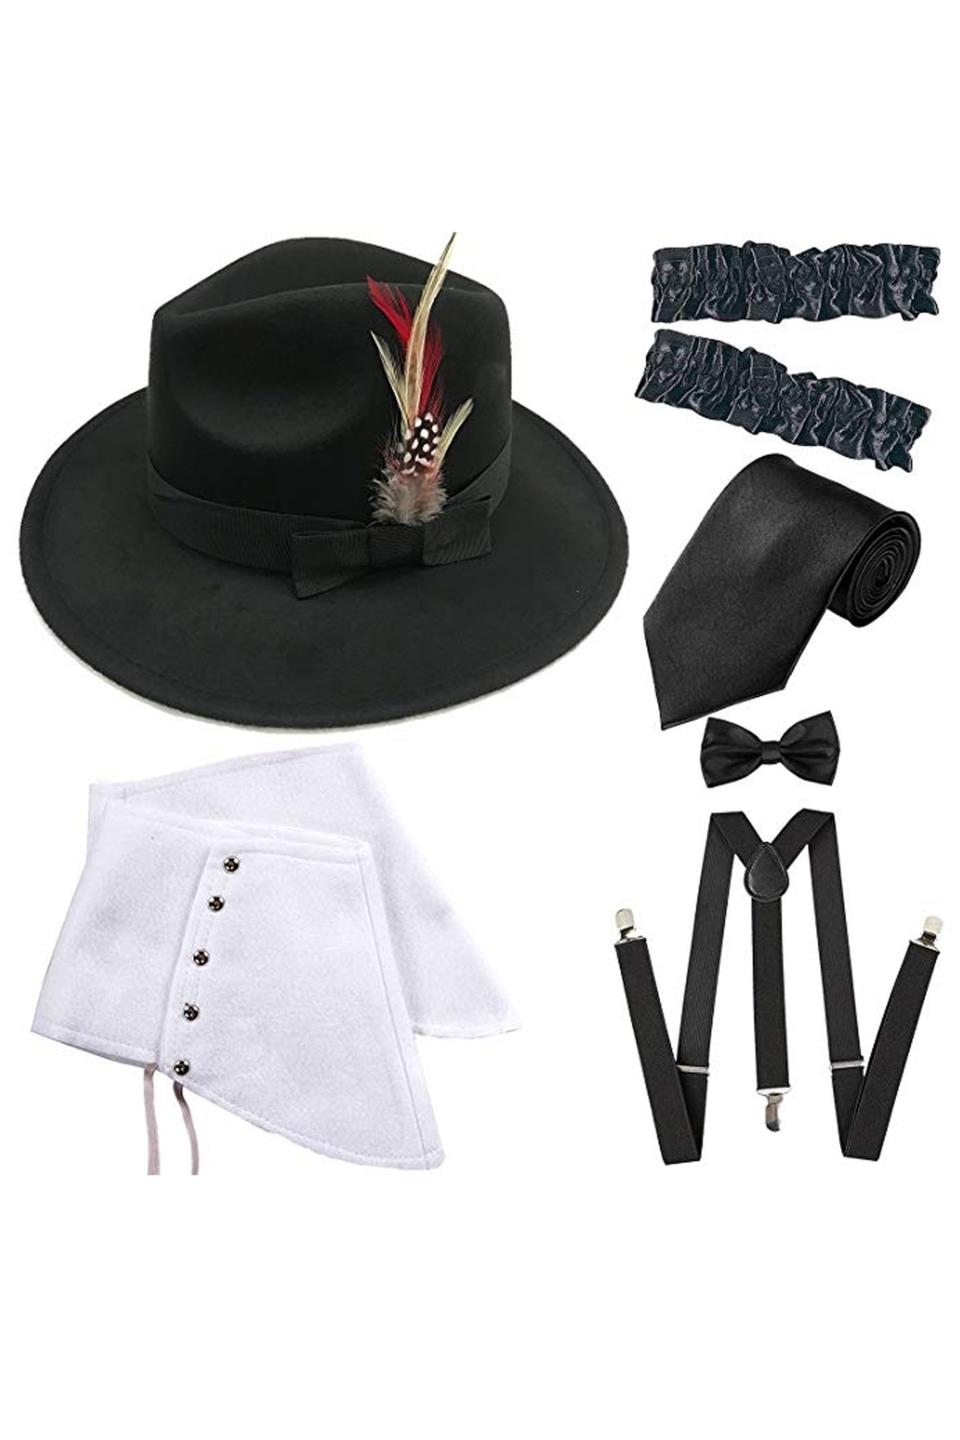 Fedora Hat, Gangster Spats ,Suspenders, Bow Tie, and Tie